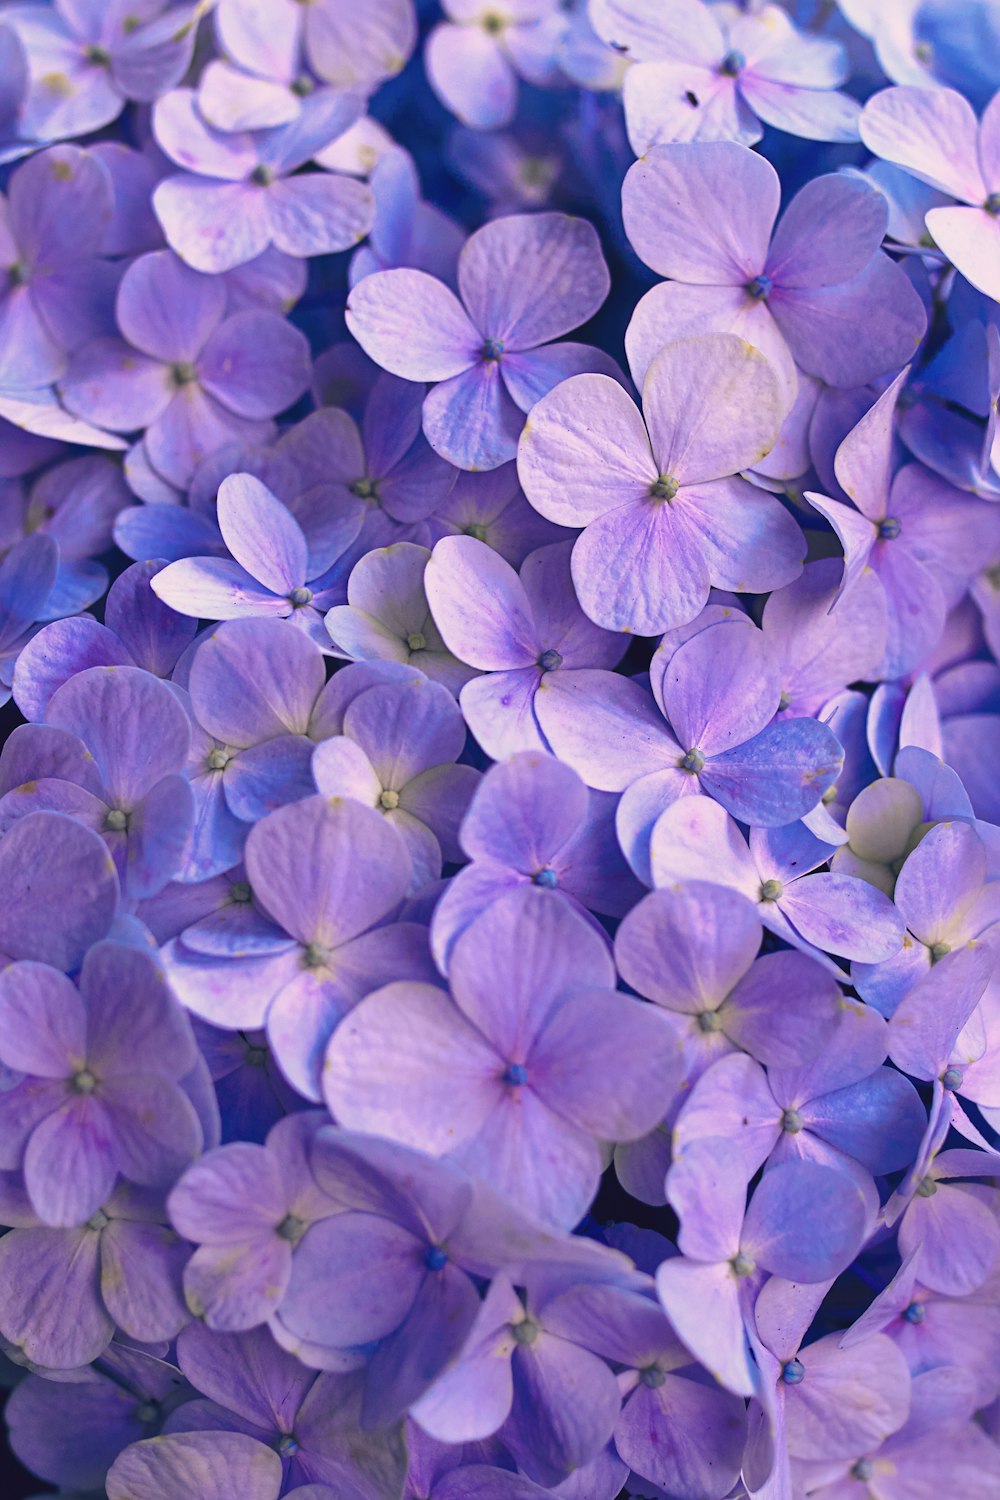 An Incredible Collection of Over 999+ Purple Flower Images in Stunning 4K Quality